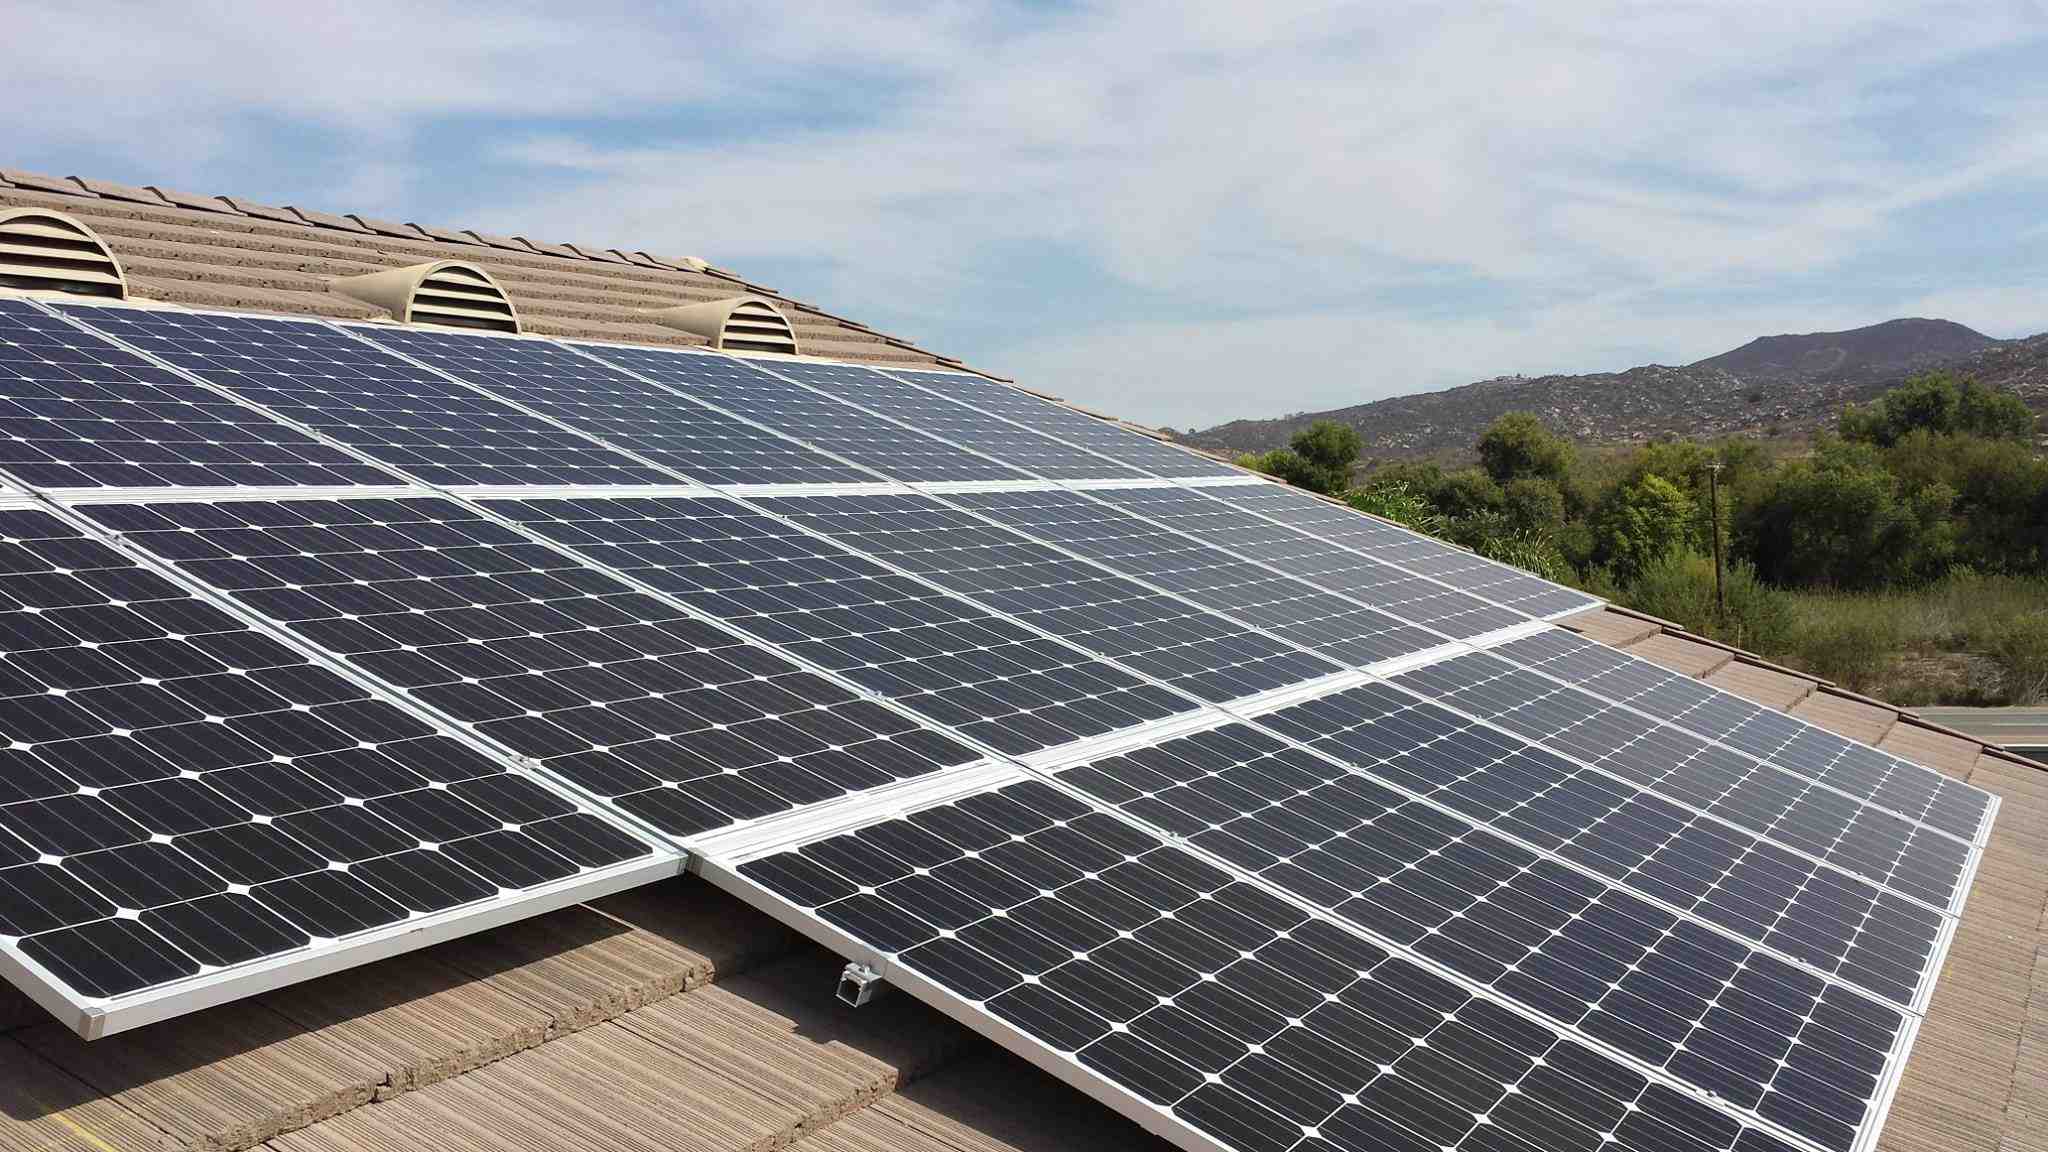 How much does it cost to install a 5kW solar system?